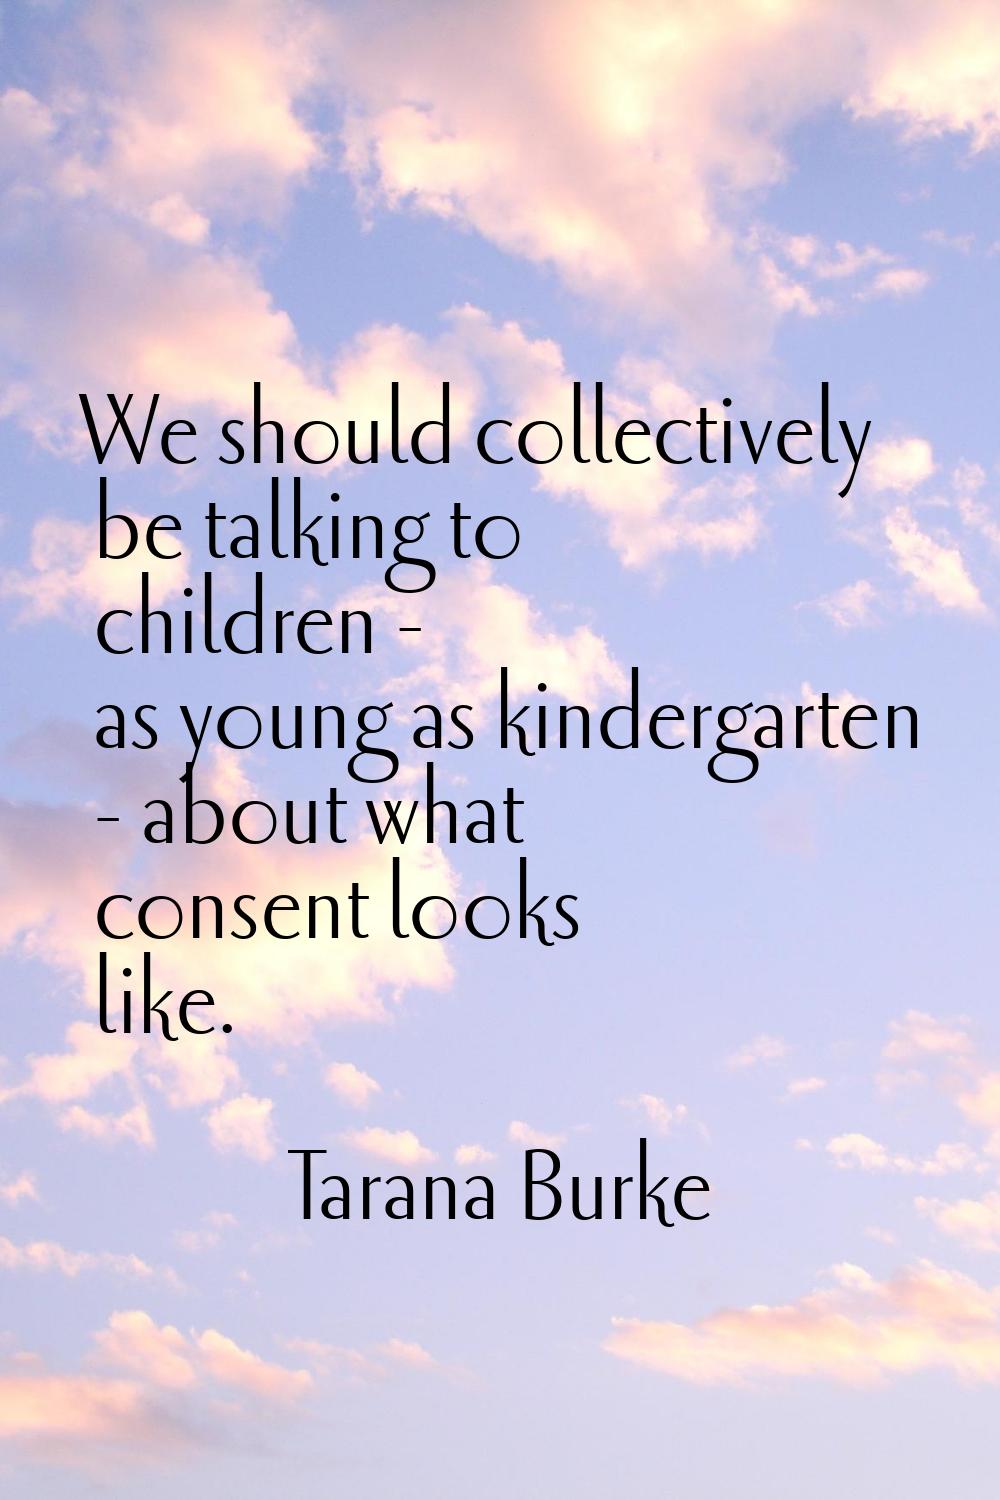 We should collectively be talking to children - as young as kindergarten - about what consent looks